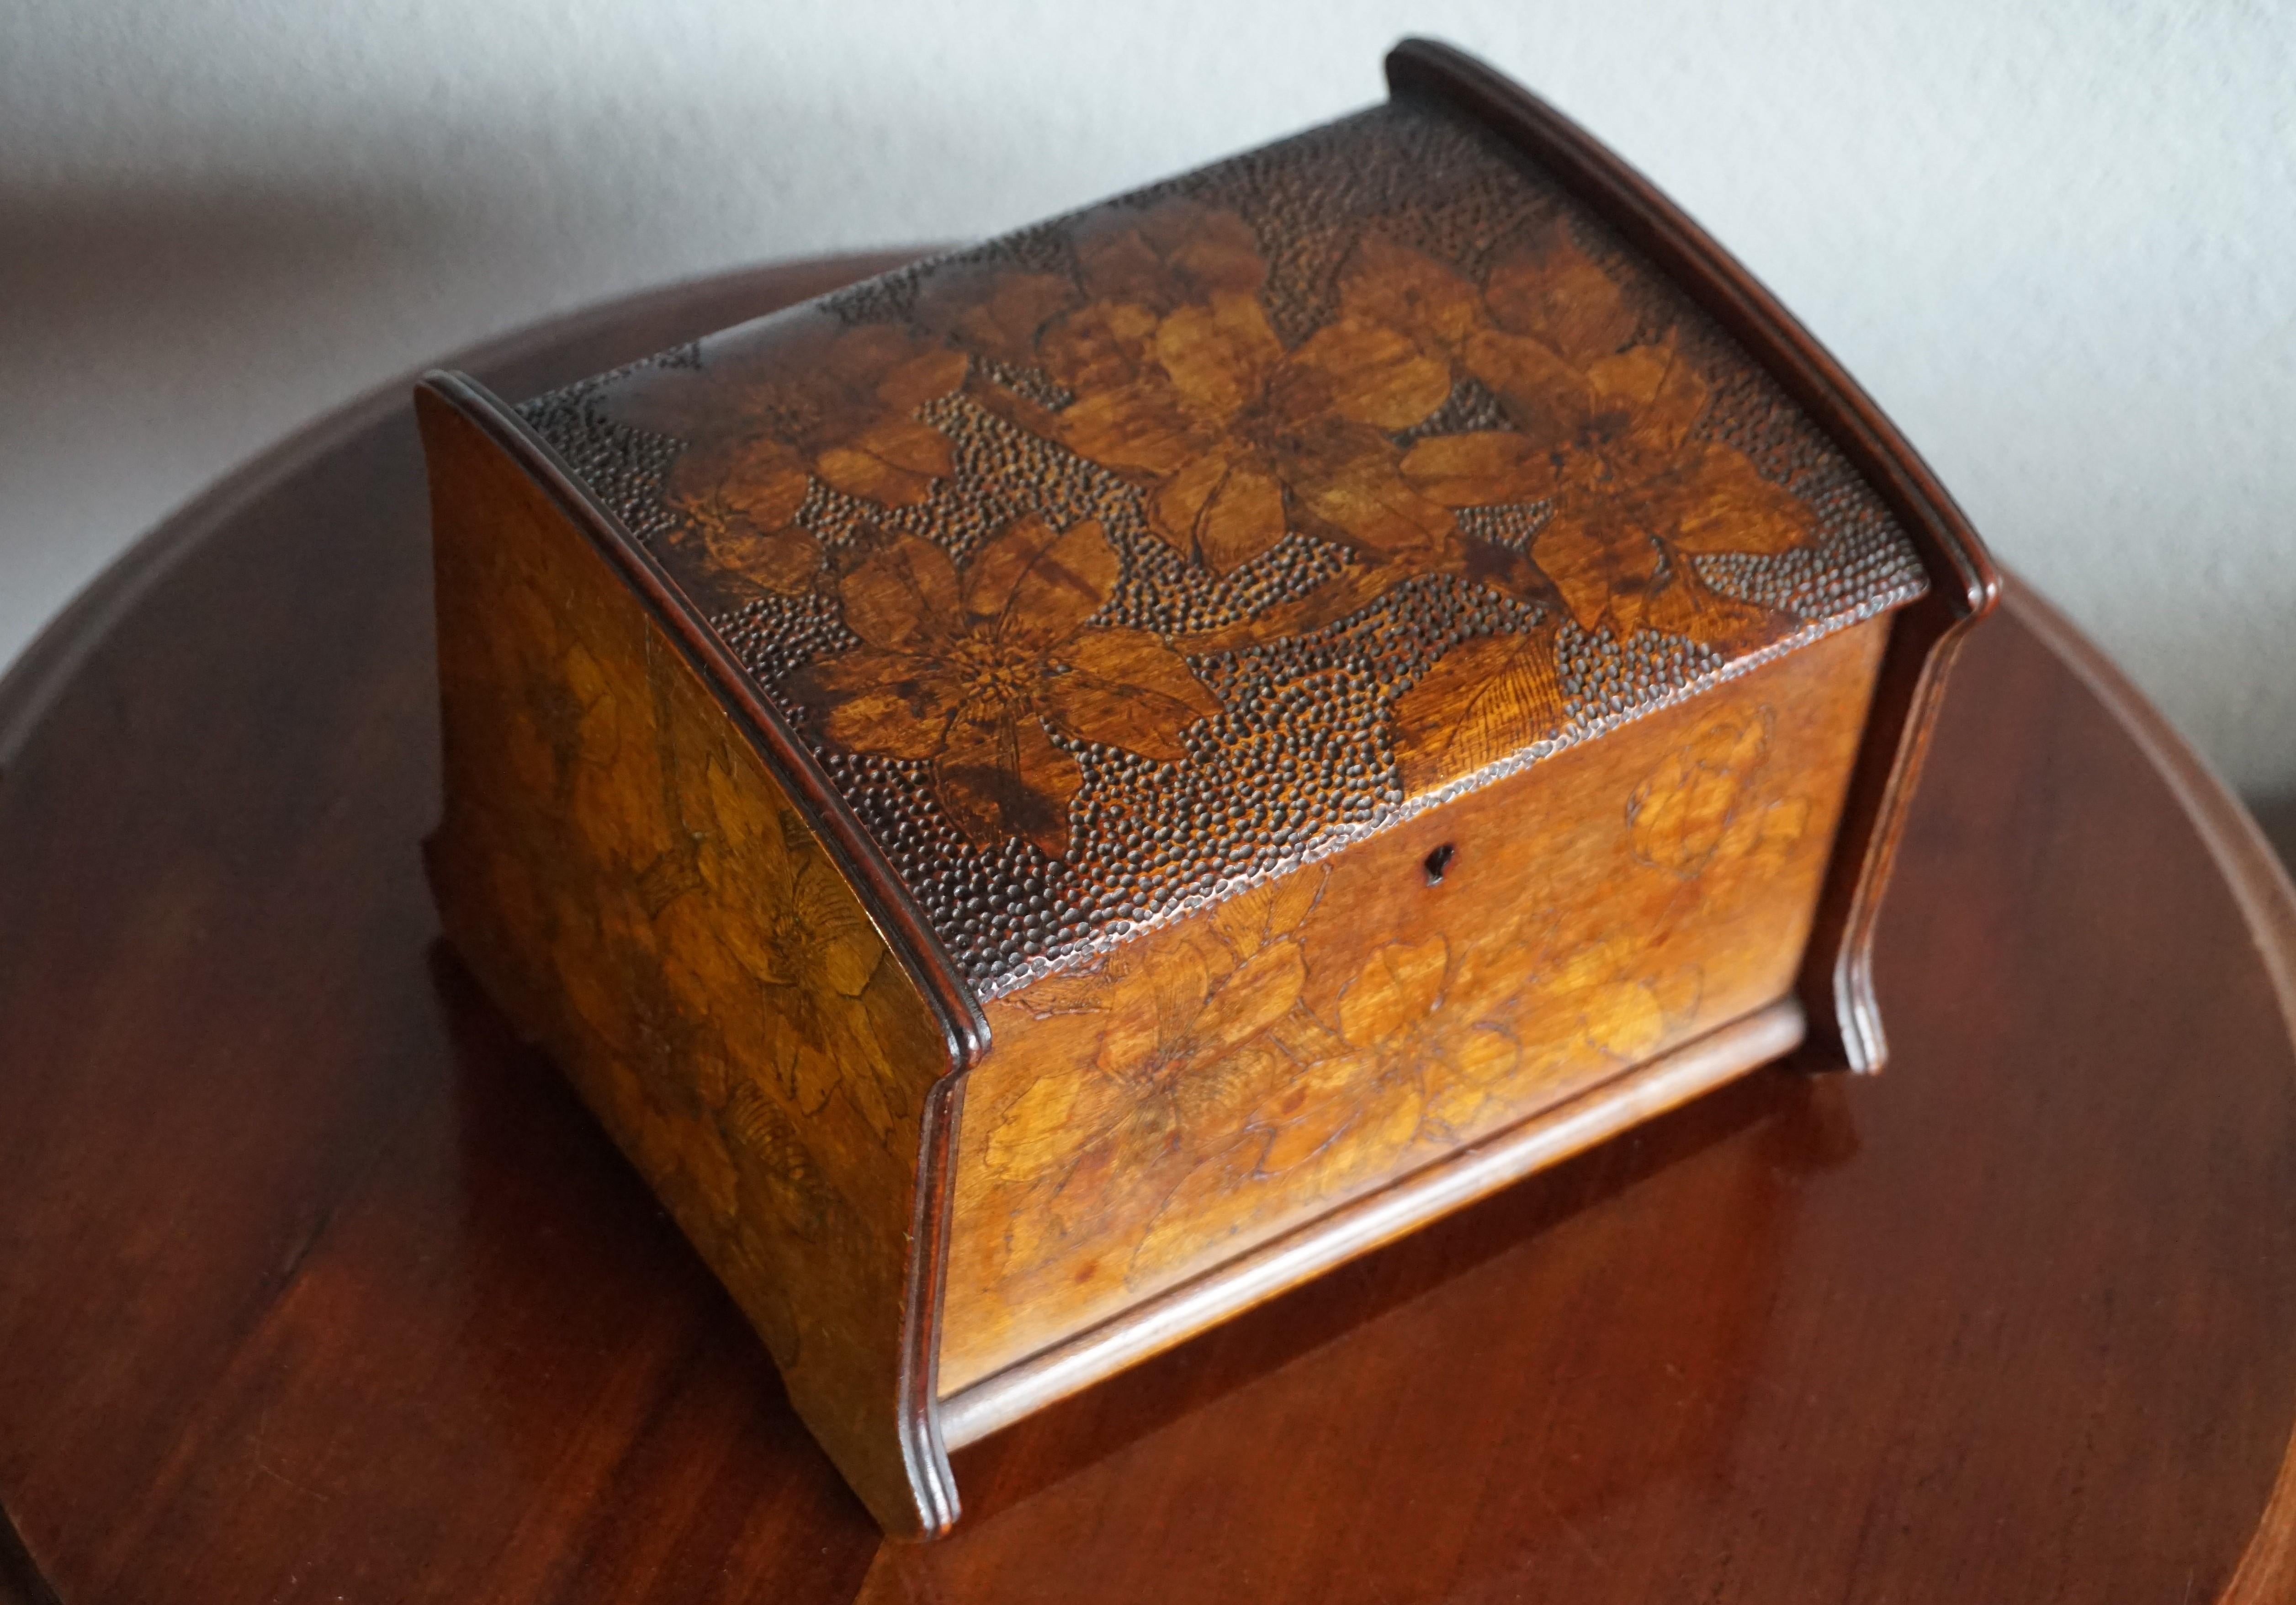 Stunning Arts & Crafts Box with Finest Hand Carved Flower Patterns in Bas Relief 5